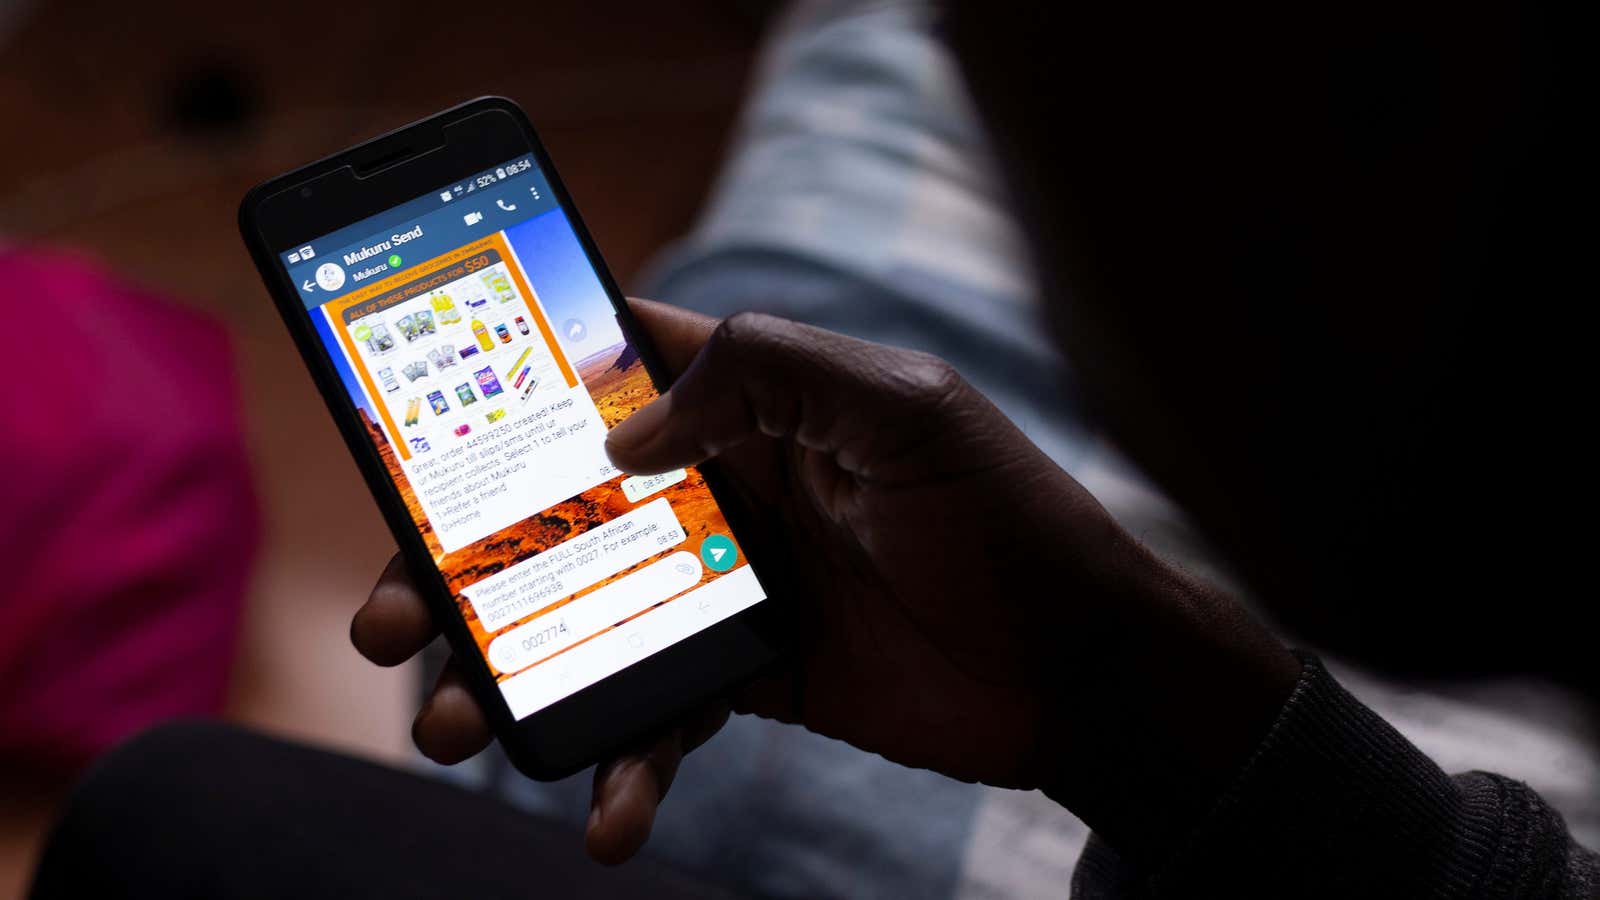 45% of all mobile money ‘key users’ in Uganda, Tanzania, and Kenya live in rural areas.